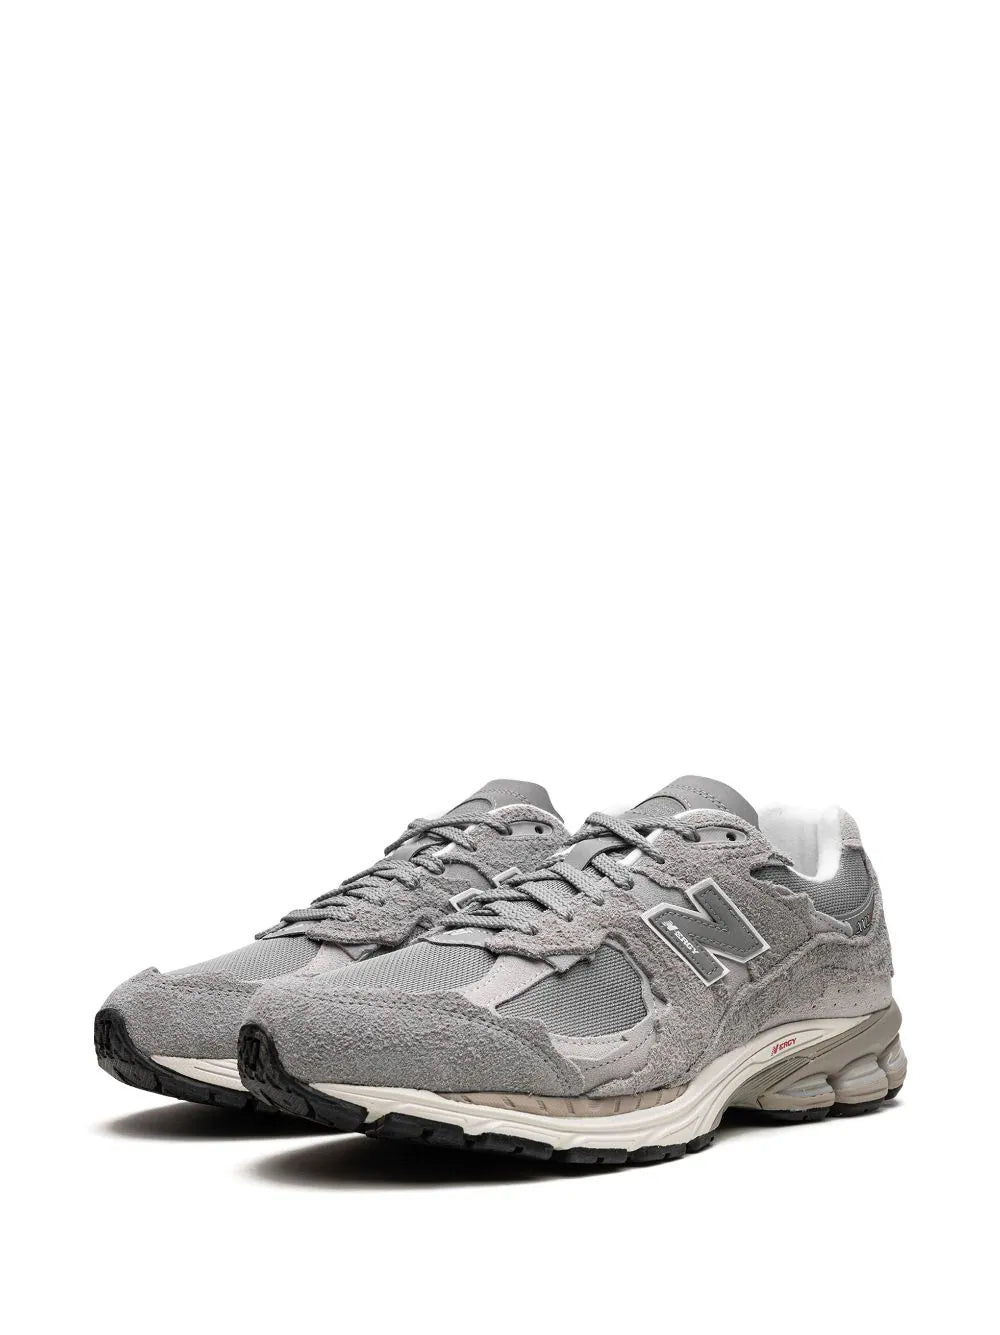 New Balance 2002R Protection Pack Grey Sale